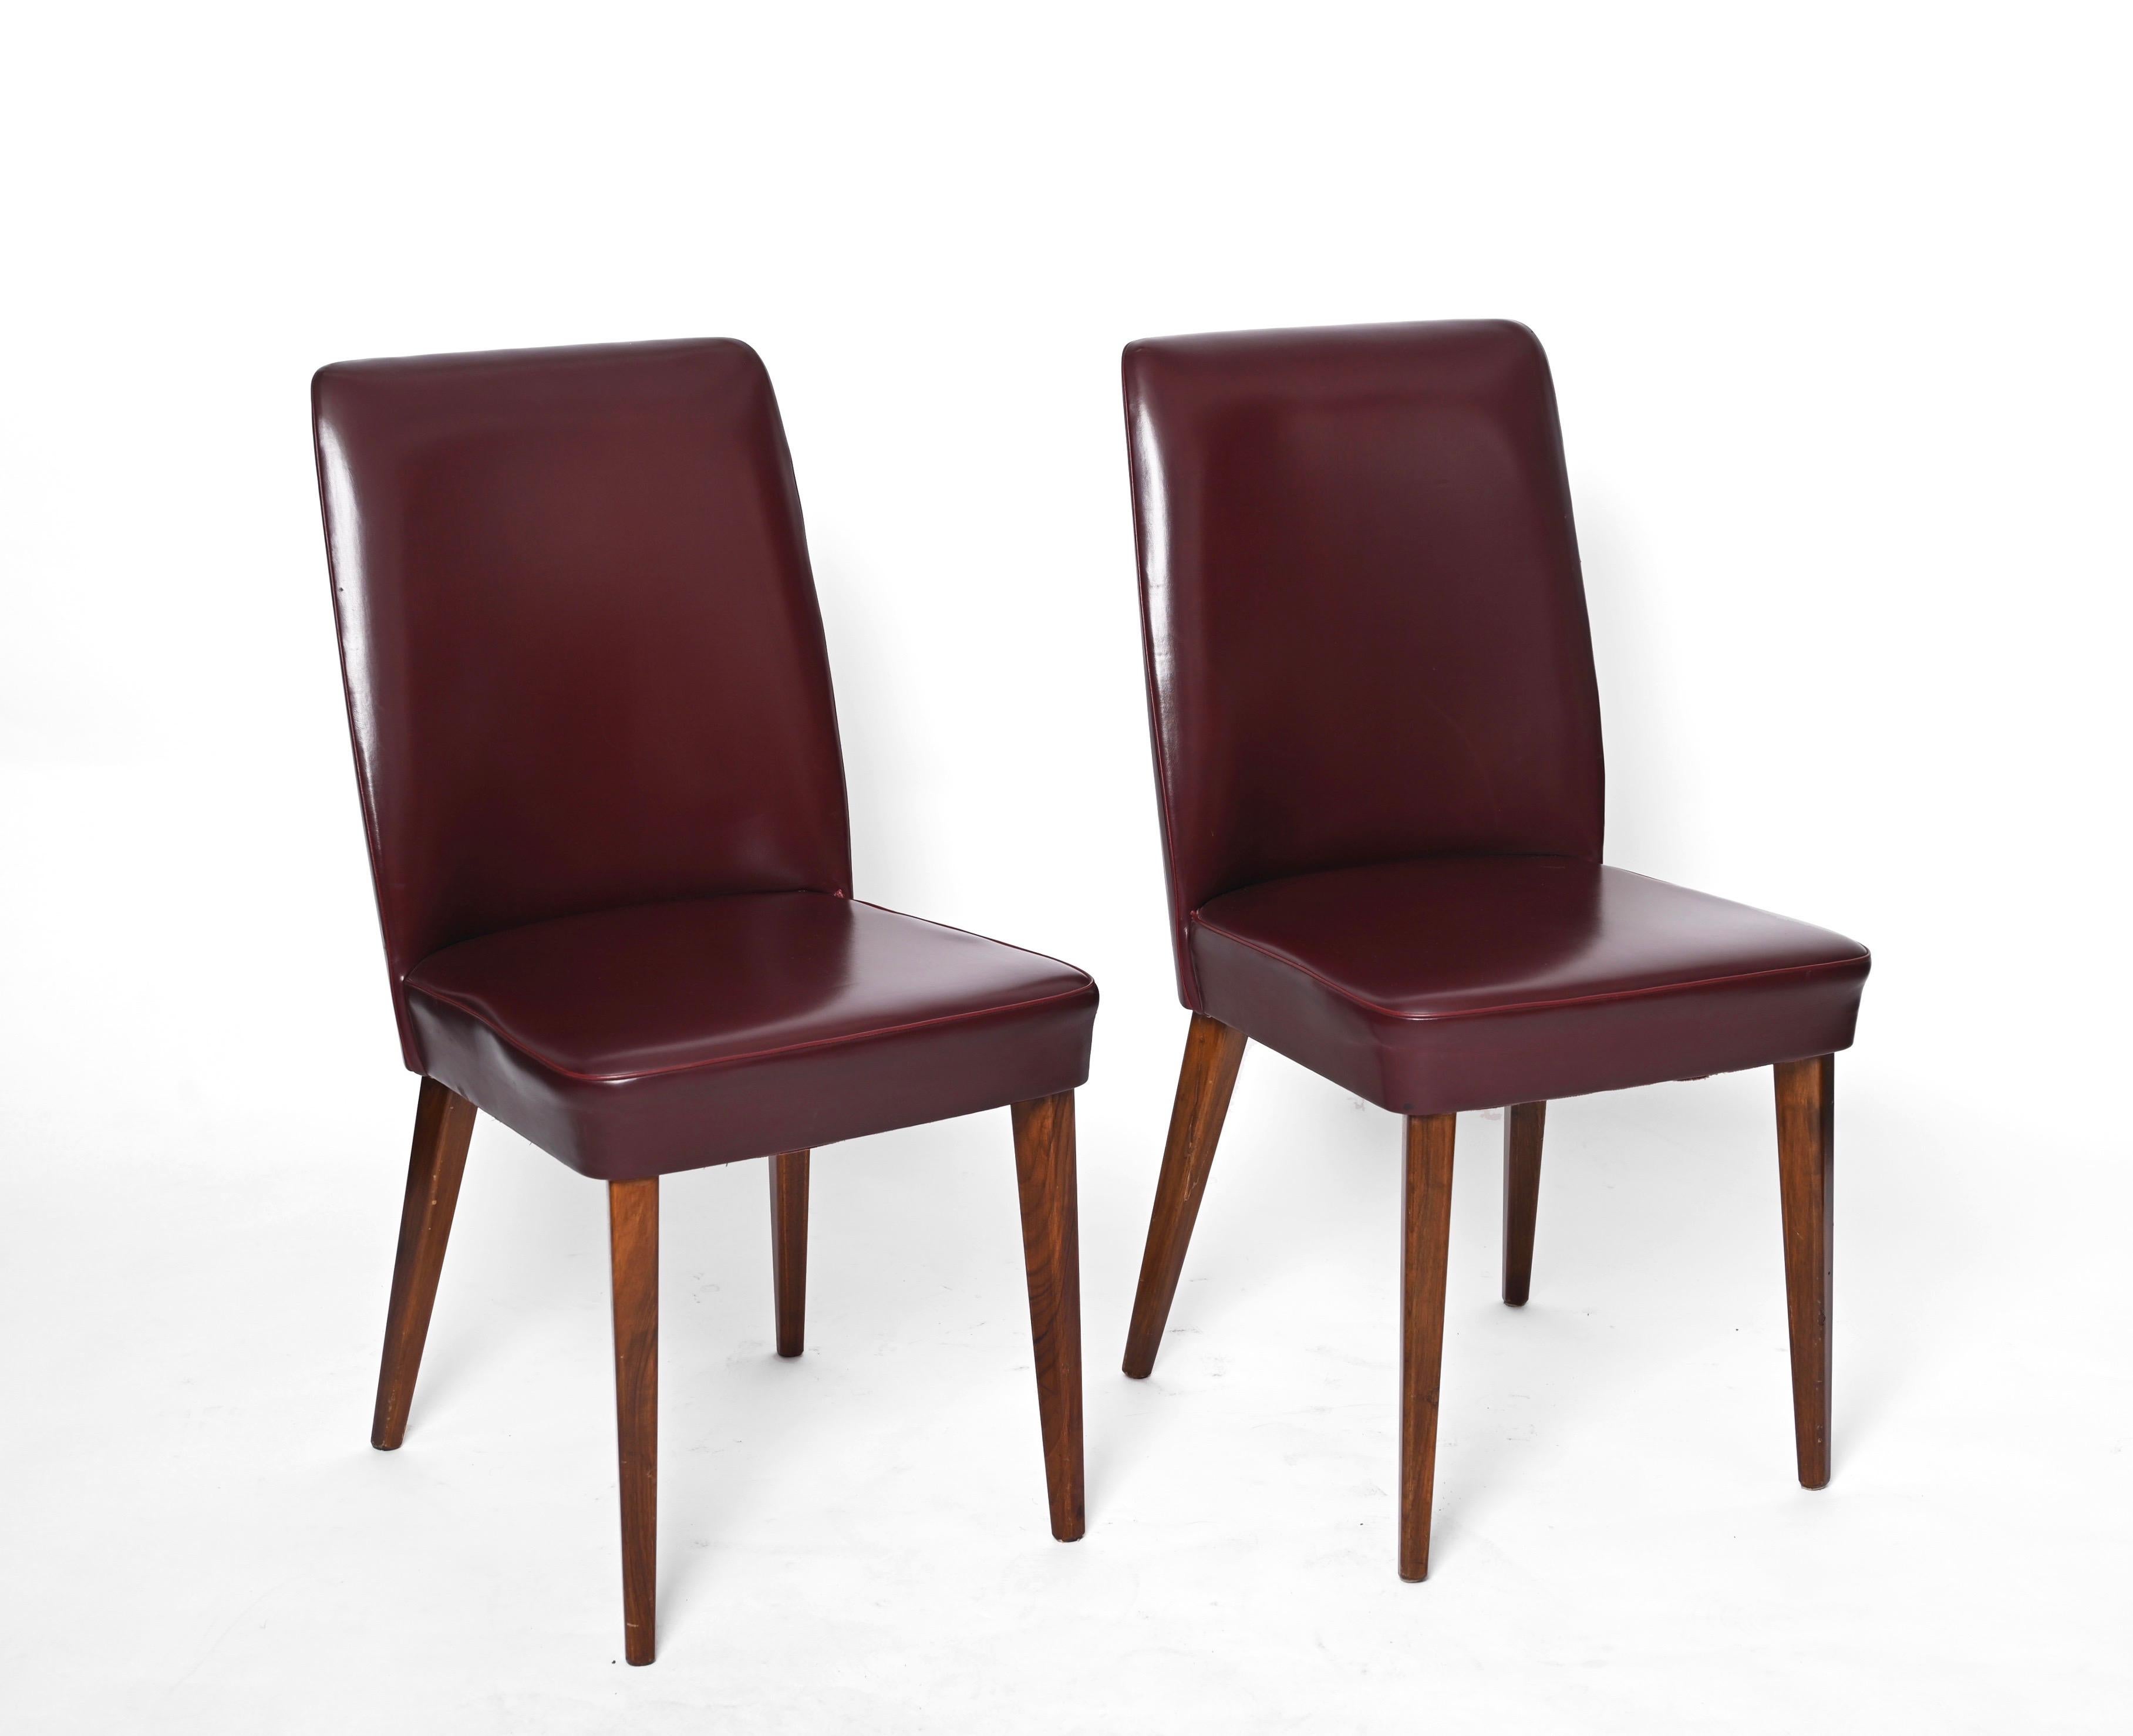 Beautiful pair of sky leather chair by Anonima Castelli Bologna Italy. These beautiful chairs were produced in Italy in the 1950s.

Padded and covered in the original bordeaux leather, the chairs features four legs in dark beechwood that pair